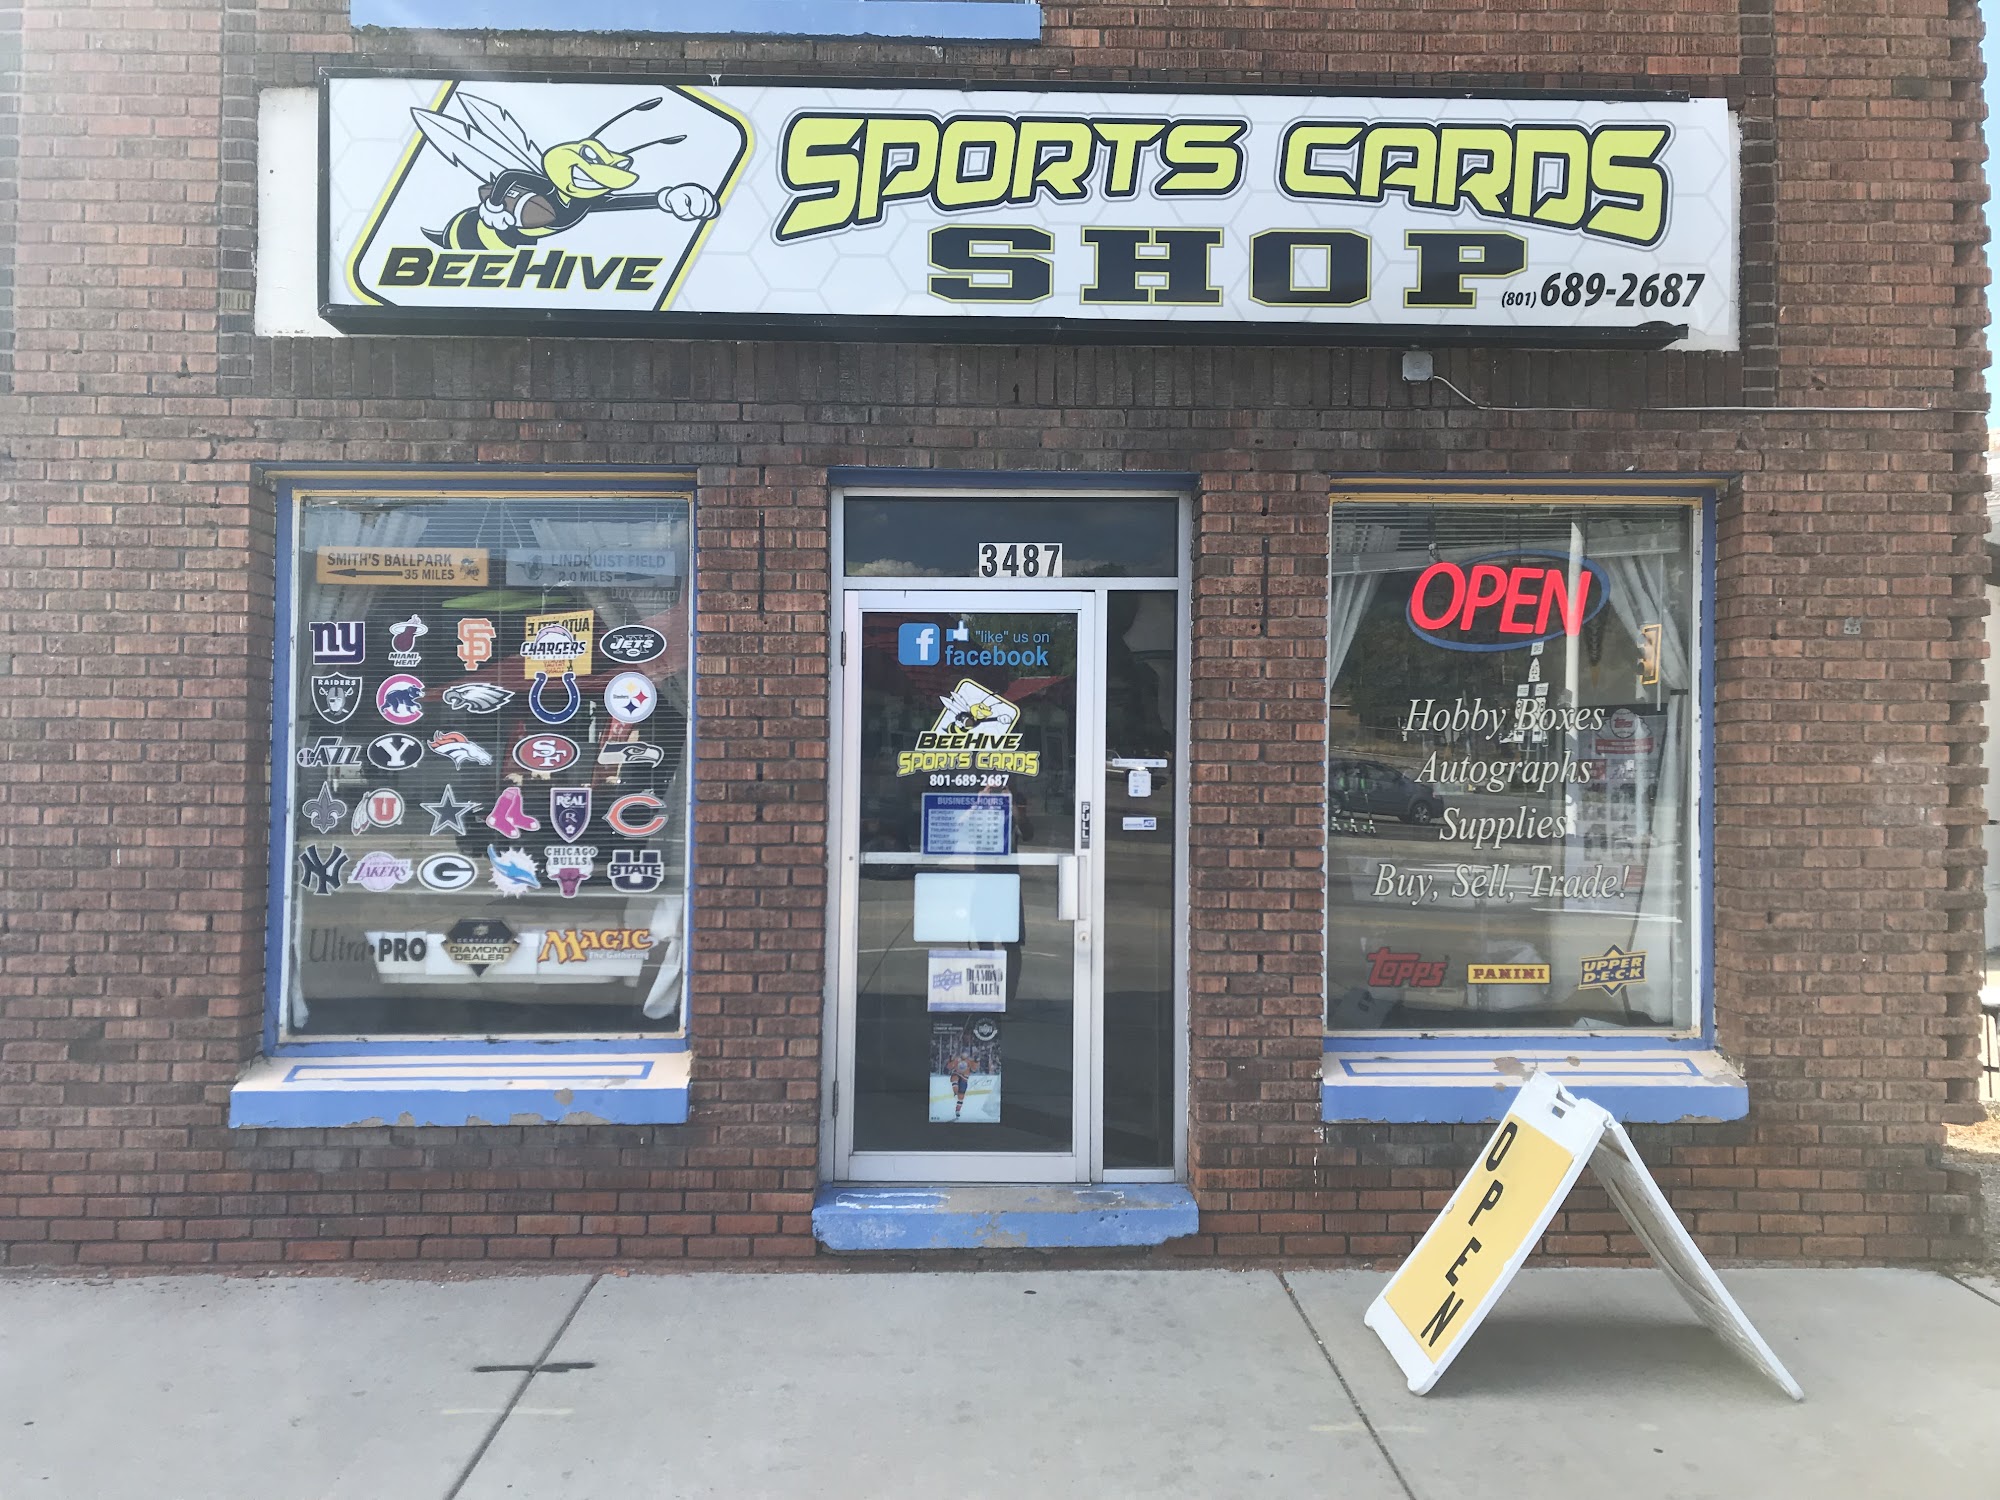 Beehive Sports Cards